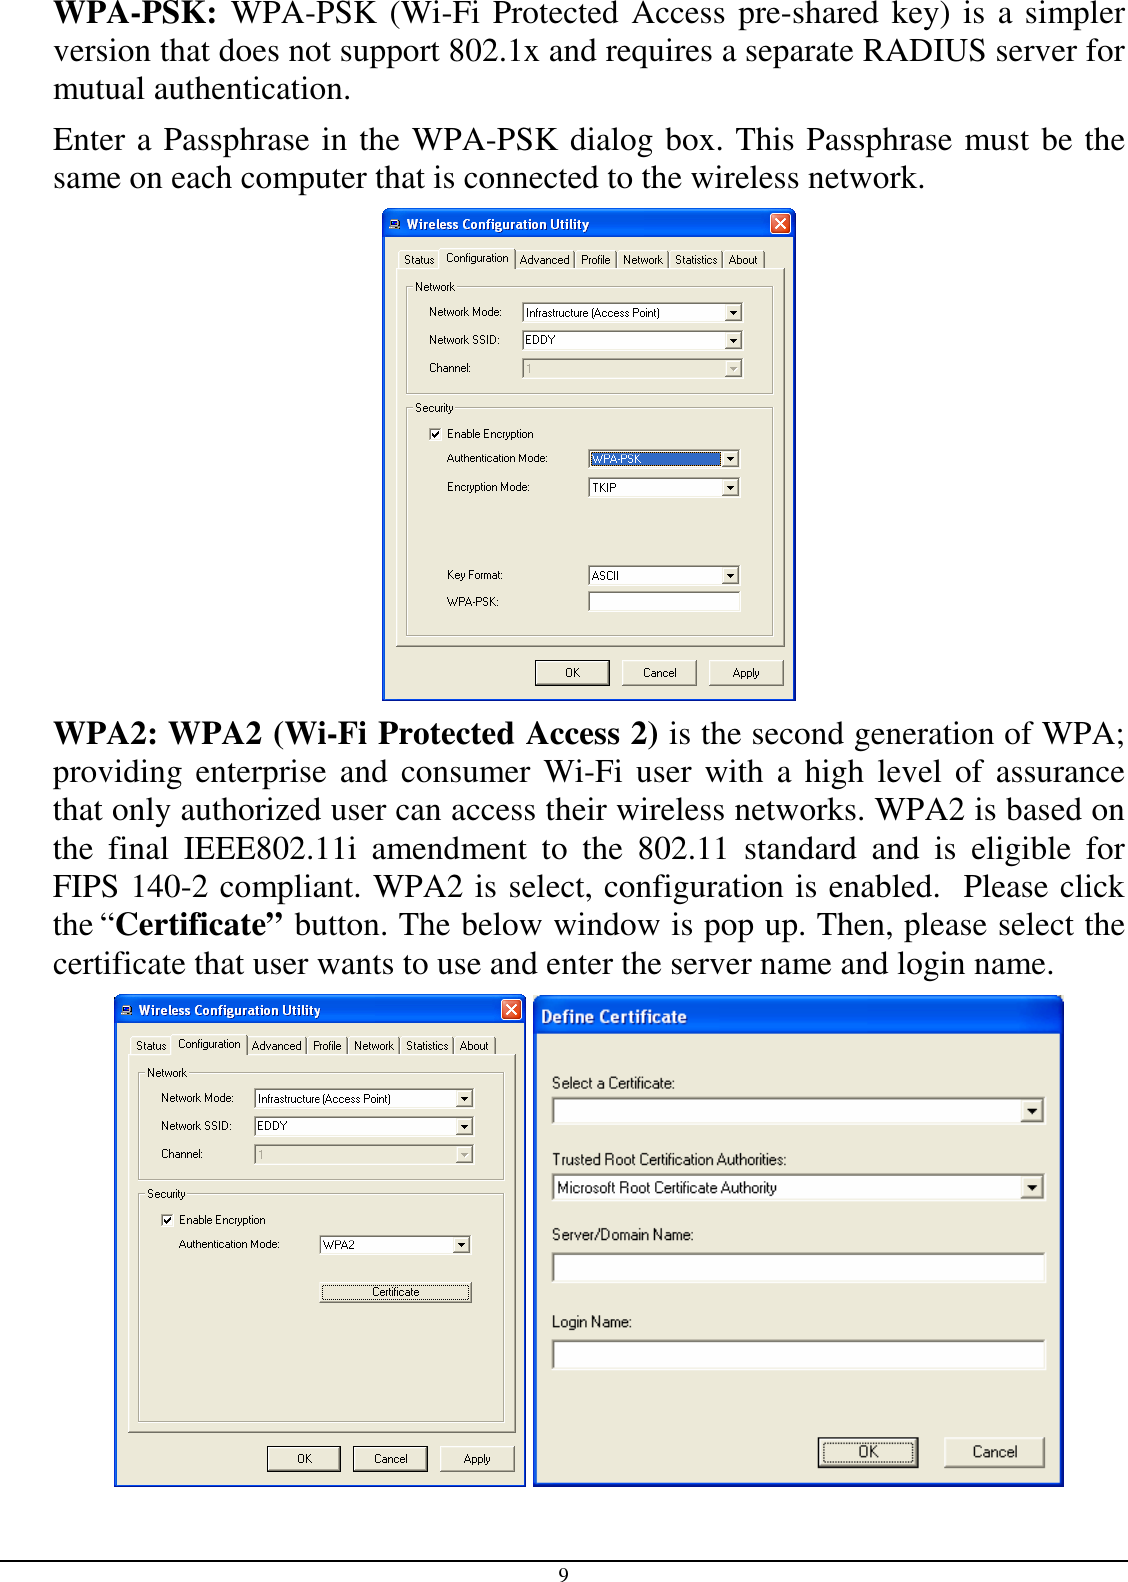 9 WPA-PSK: WPA-PSK (Wi-Fi Protected Access pre-shared key) is a simpler version that does not support 802.1x and requires a separate RADIUS server for mutual authentication. Enter a Passphrase in the WPA-PSK dialog box. This Passphrase must be the same on each computer that is connected to the wireless network.  WPA2: WPA2 (Wi-Fi Protected Access 2) is the second generation of WPA; providing enterprise and consumer Wi-Fi user  with a  high  level of assurance that only authorized user can access their wireless networks. WPA2 is based on the  final  IEEE802.11i  amendment  to  the  802.11  standard  and  is  eligible  for FIPS 140-2 compliant. WPA2 is select, configuration is enabled.  Please click the “Certificate” button. The below window is pop up. Then, please select the certificate that user wants to use and enter the server name and login name.    